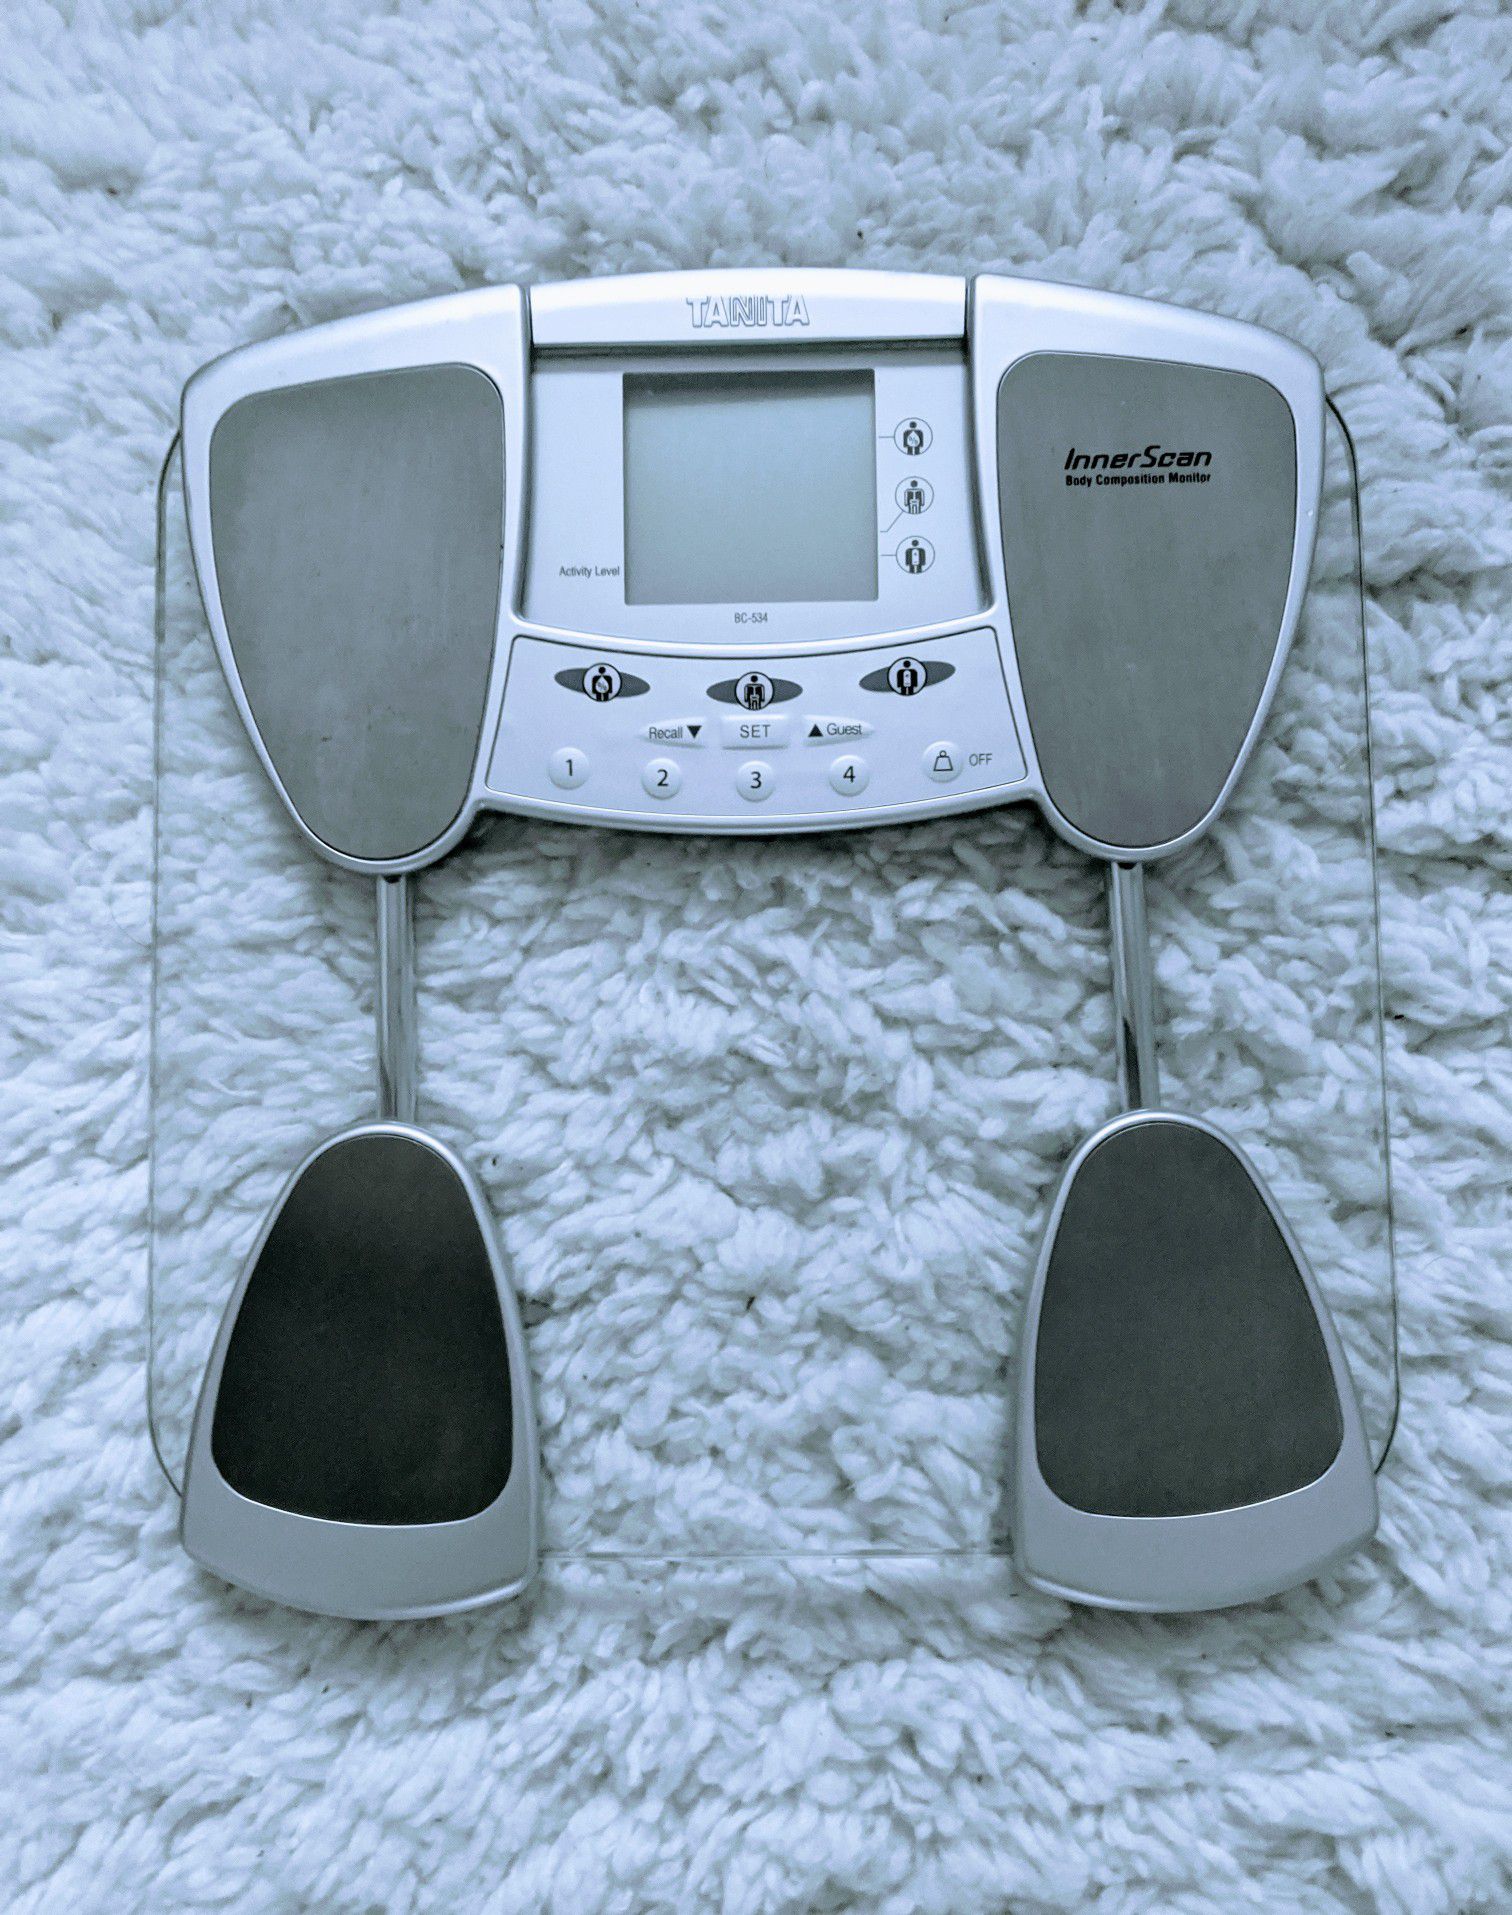 Tanita BC-534 Glass InnerScan Body Composition Monitor Weight Scale Body Fat %